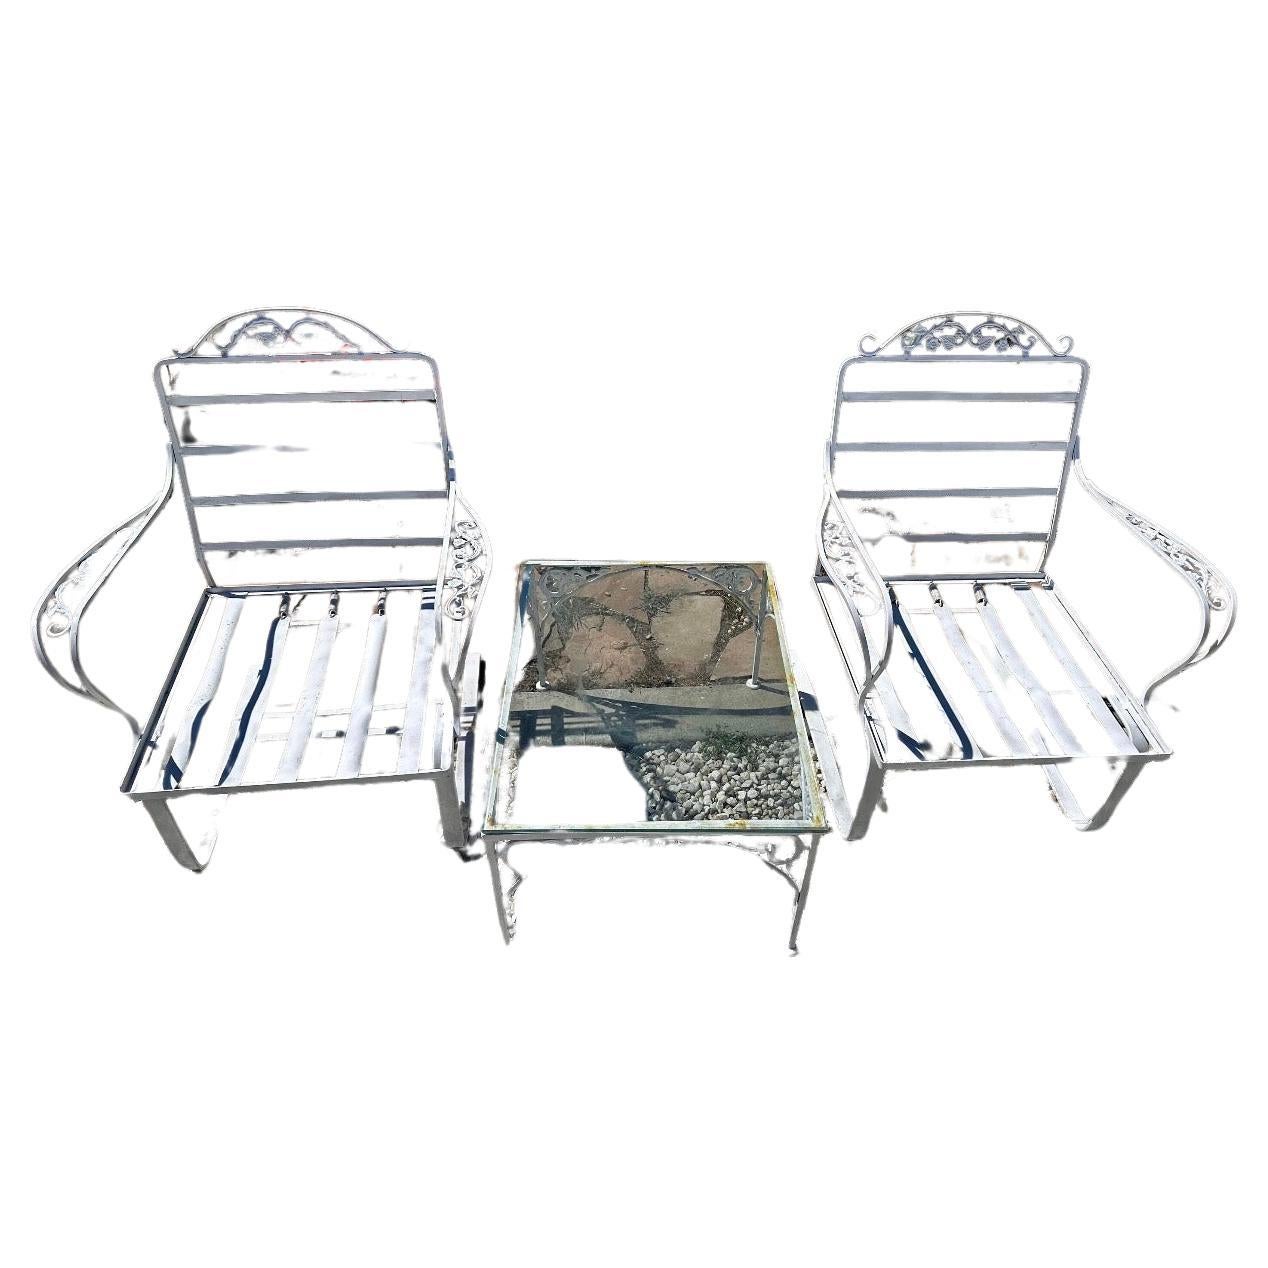 A beautiful set of rocking chairs plus matching coffee table with floral pattern For Sale